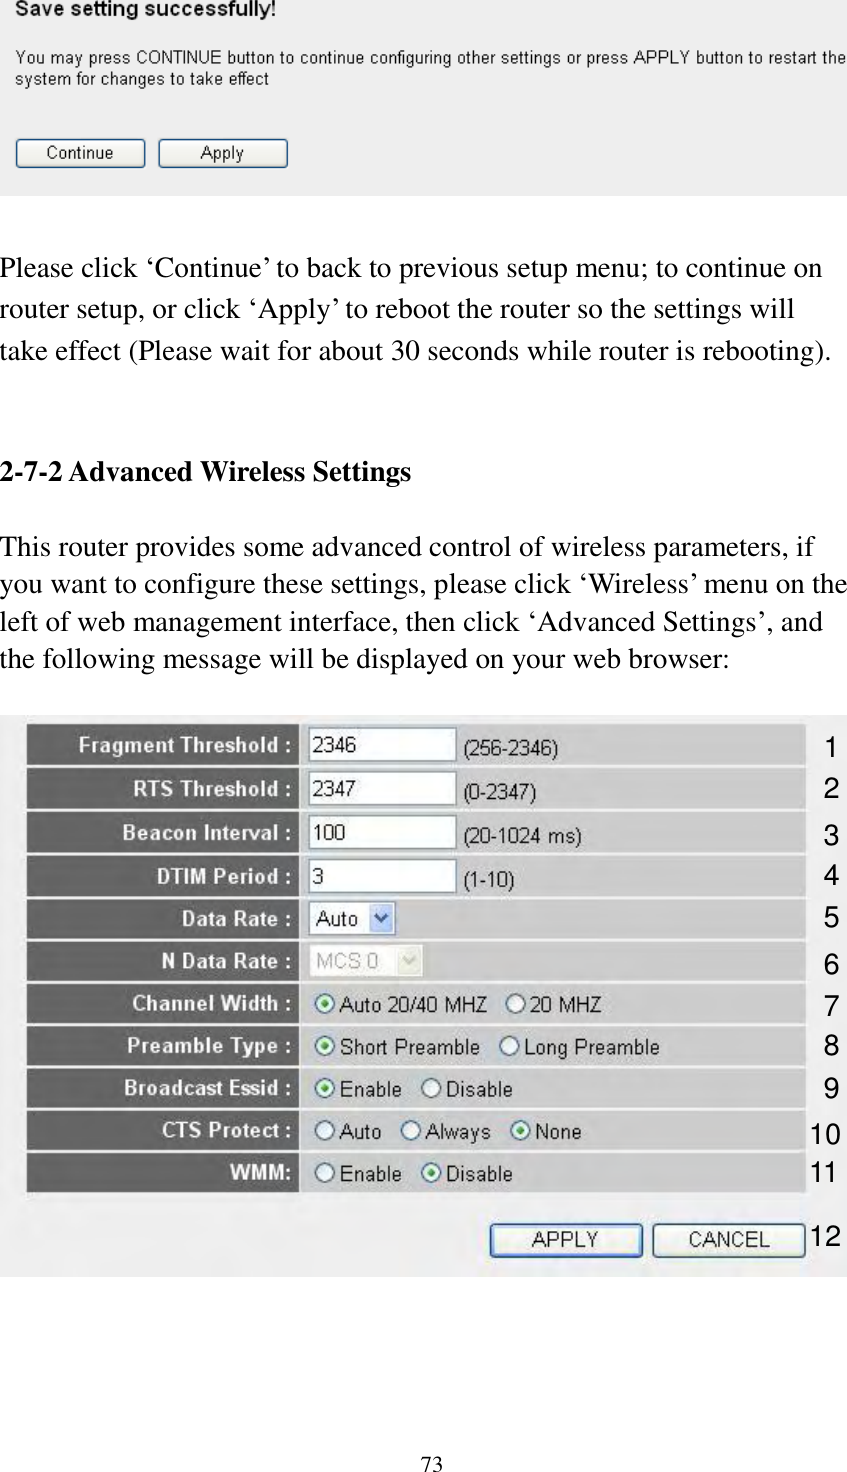 73   Please click „Continue‟ to back to previous setup menu; to continue on router setup, or click „Apply‟ to reboot the router so the settings will take effect (Please wait for about 30 seconds while router is rebooting).   2-7-2 Advanced Wireless Settings  This router provides some advanced control of wireless parameters, if you want to configure these settings, please click „Wireless‟ menu on the left of web management interface, then click „Advanced Settings‟, and the following message will be displayed on your web browser:       1 2 3 4 5 7 8 6 9 10 11 12 